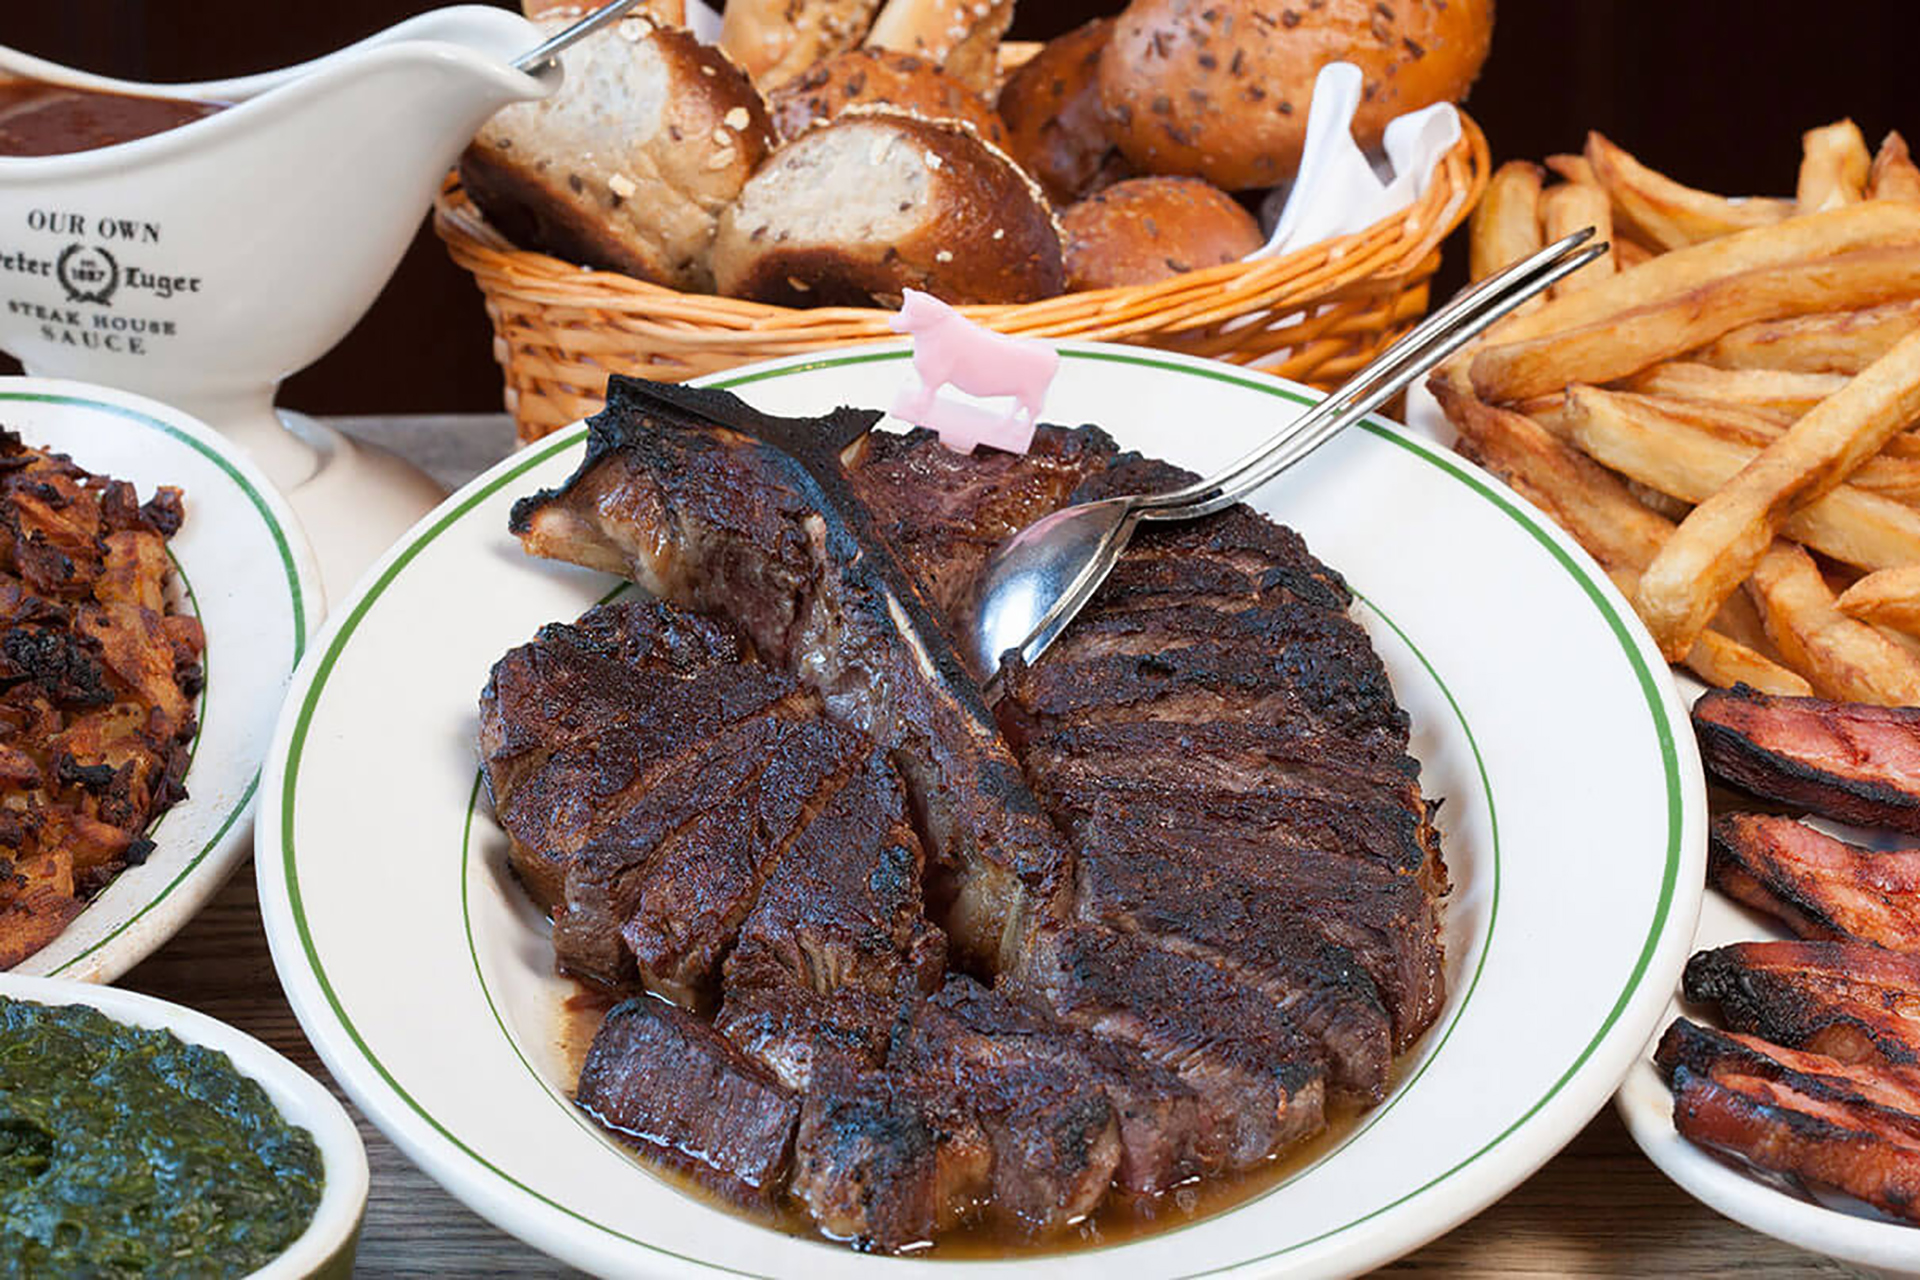 Peter Luger steakhouse launches online reservations